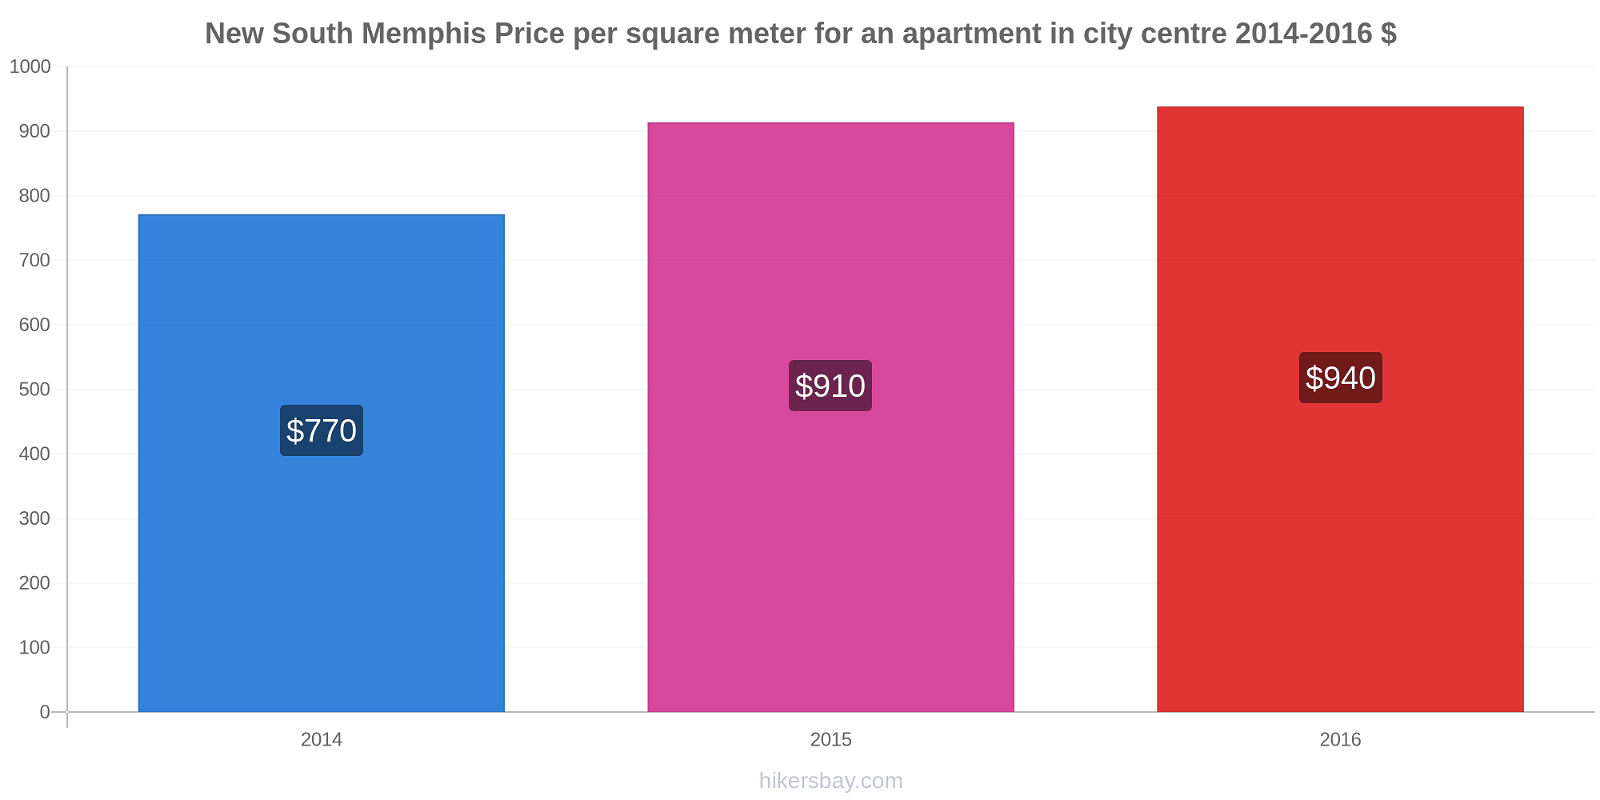 New South Memphis price changes Price per square meter for an apartment in city centre hikersbay.com